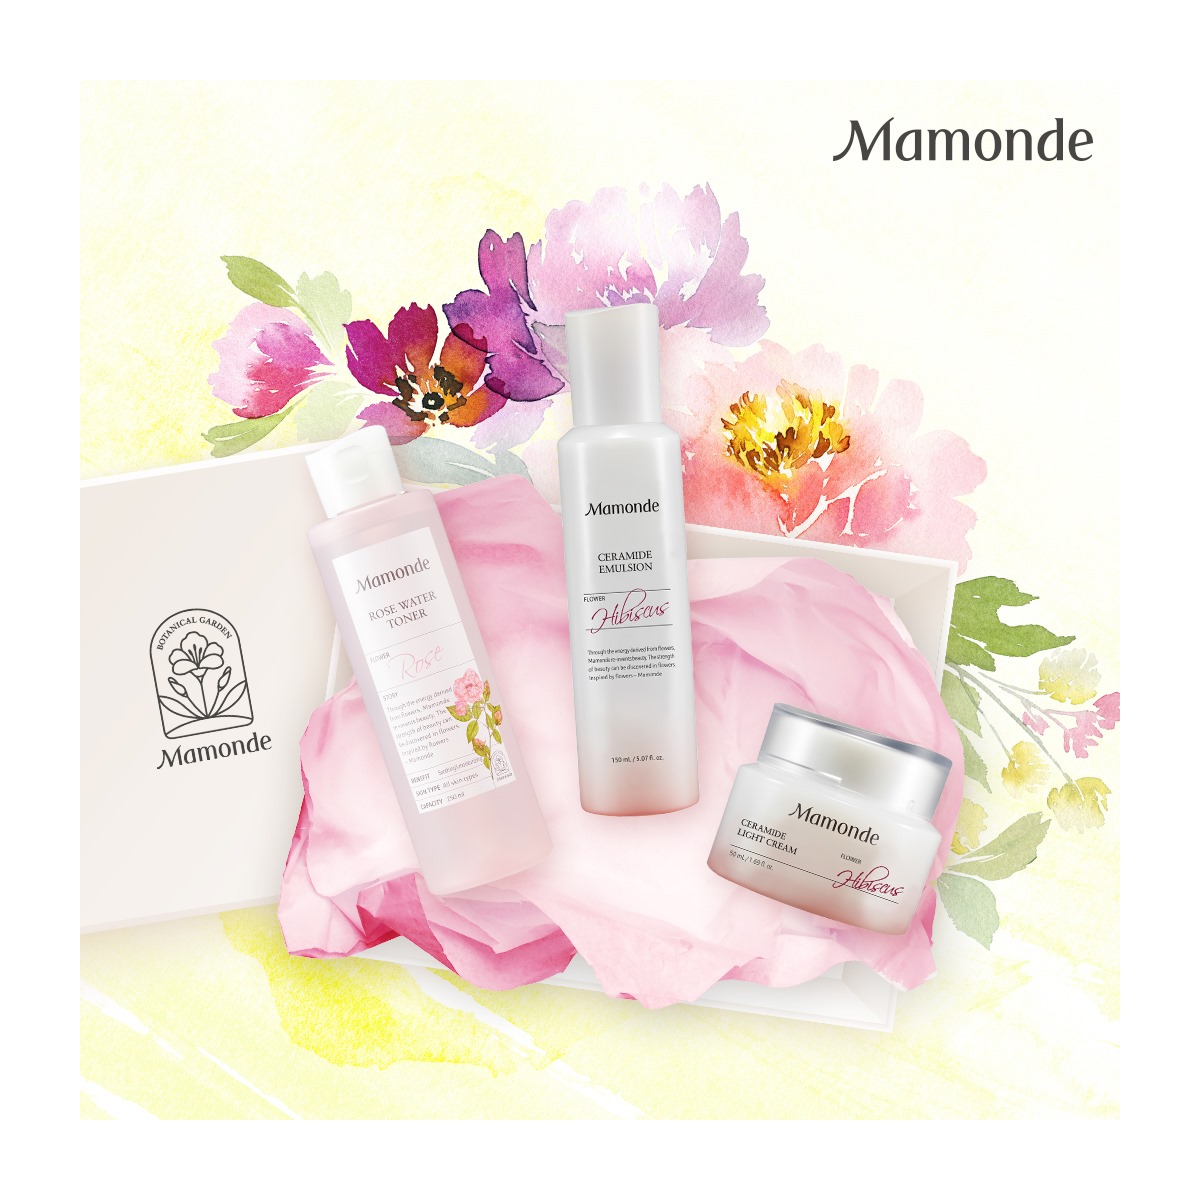 [BEAUTY REVIEW] LOOK TO CERAMIDE & ROSE WATER FOR RAMADHAN  Korean Brand Mamonde Offers Certified Halal And Wudhu-Friendly Products